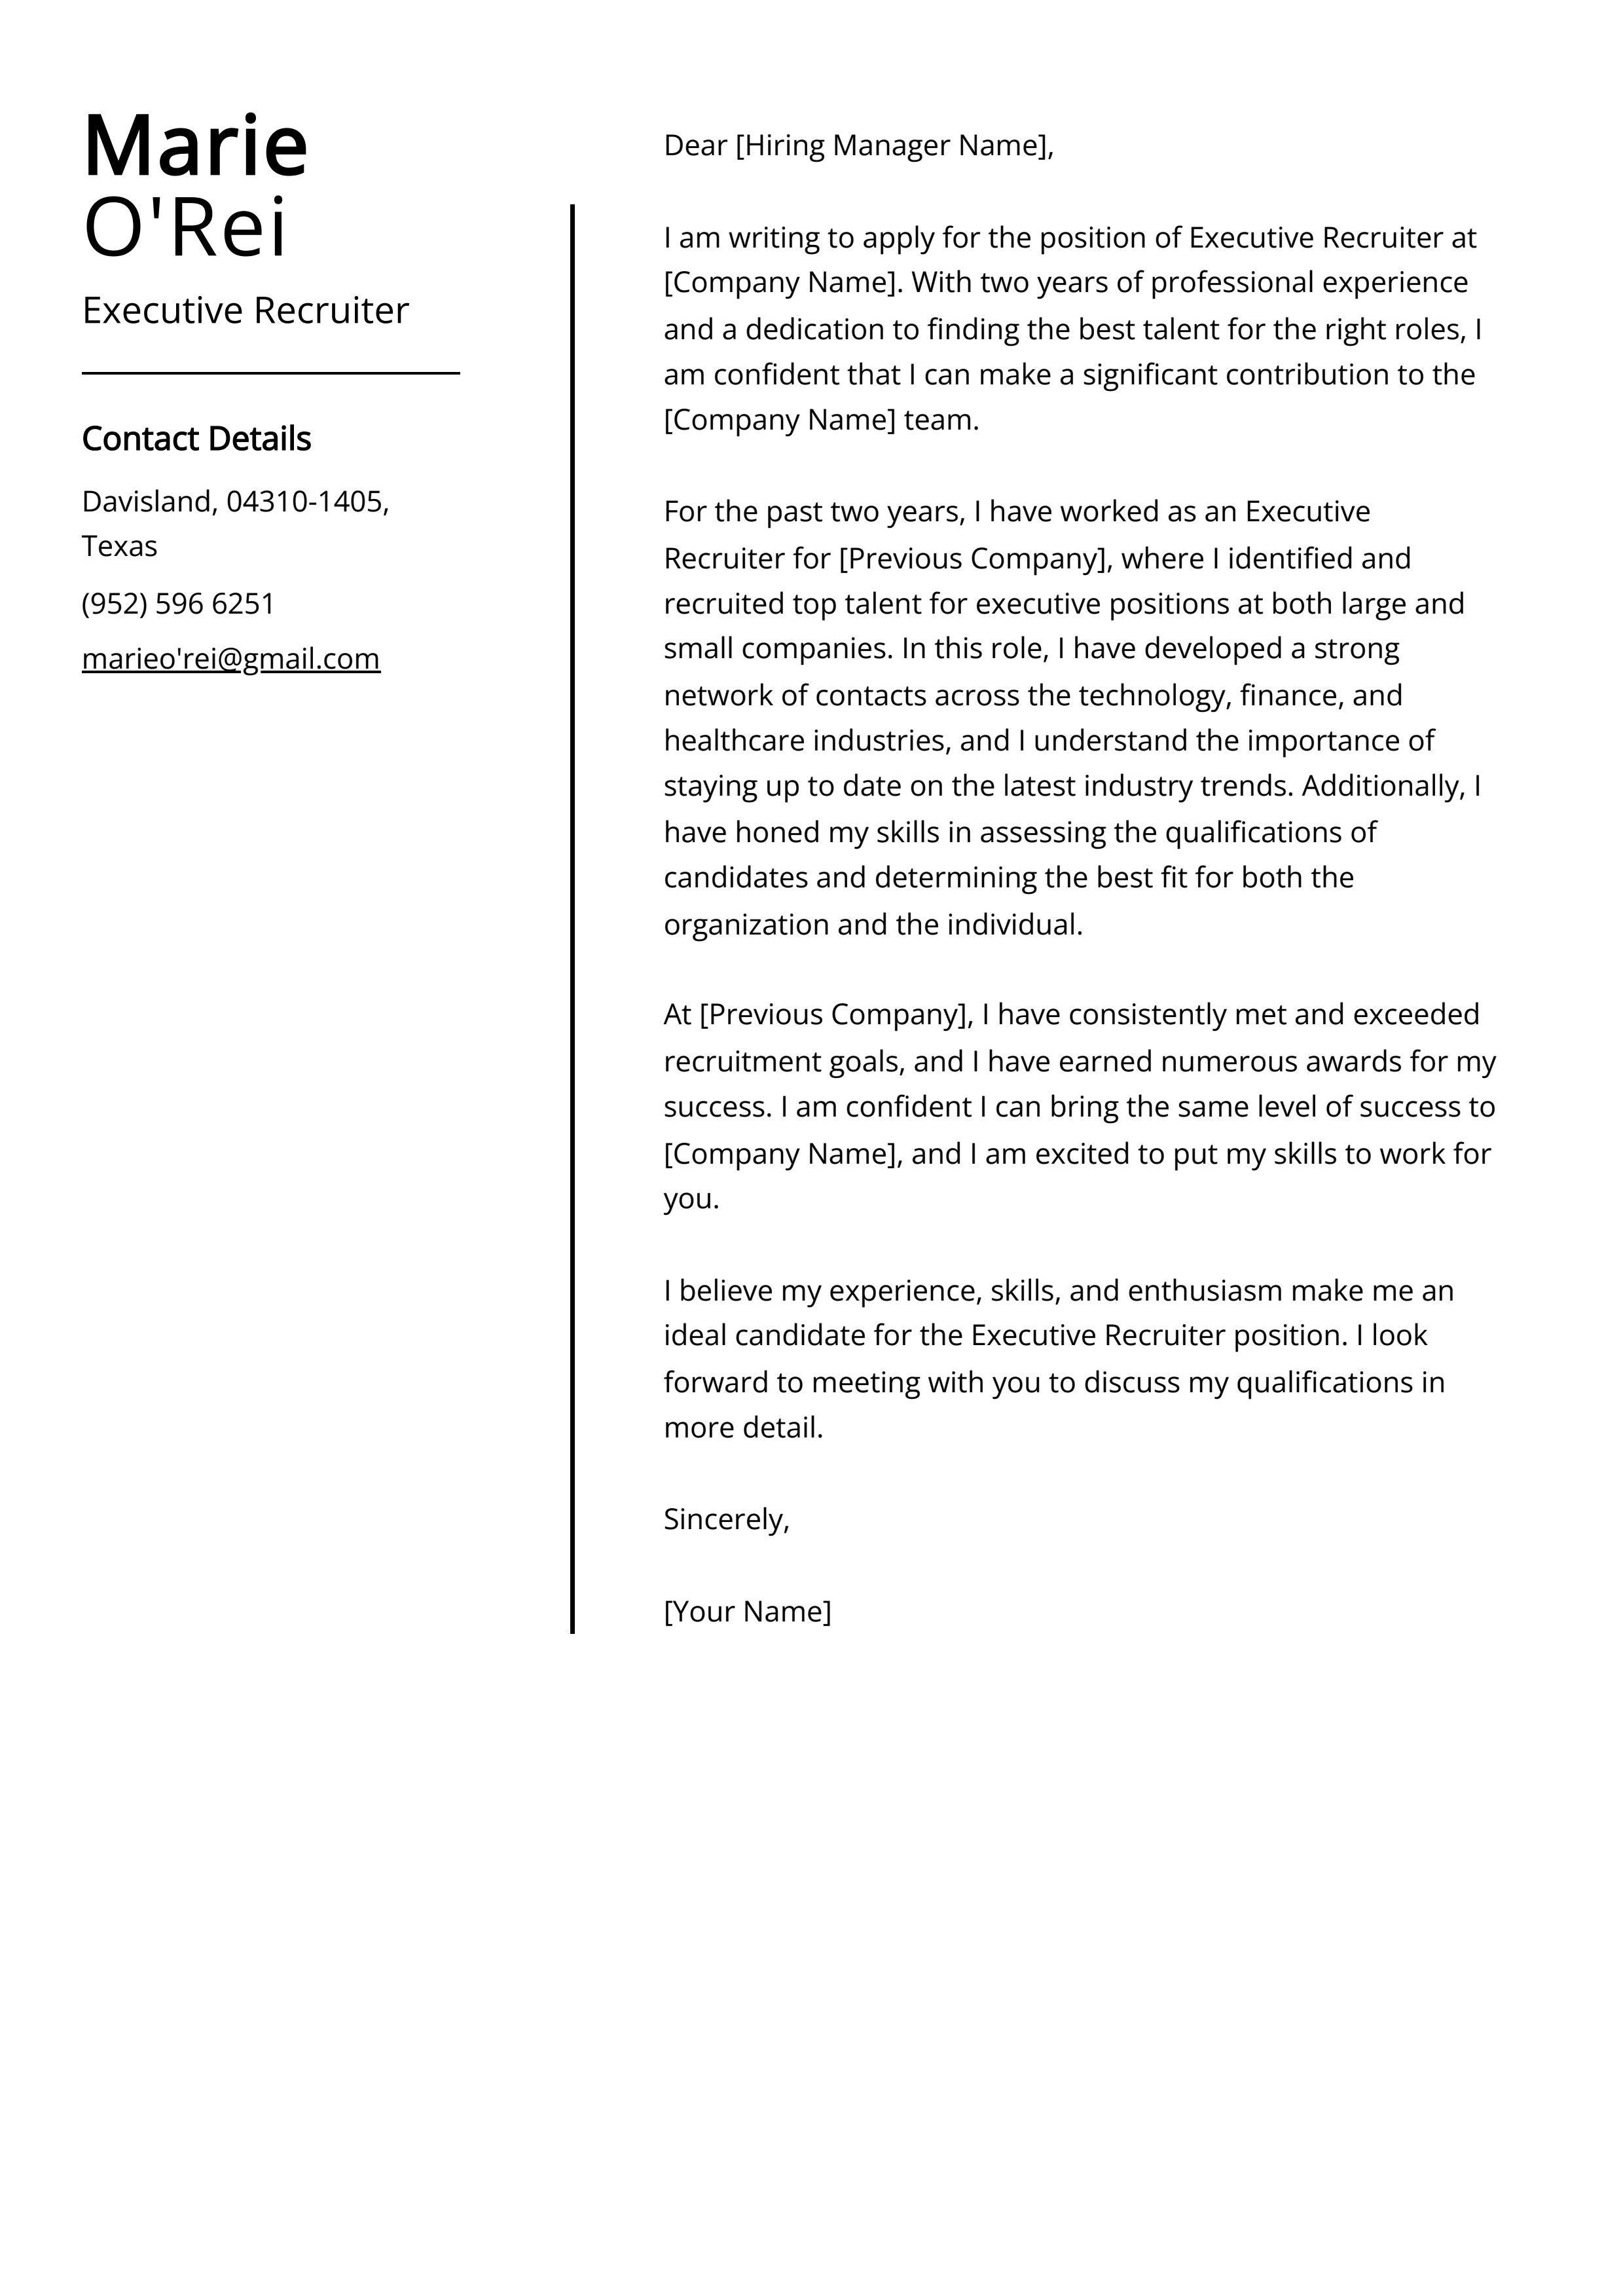 Executive Recruiter Cover Letter Example